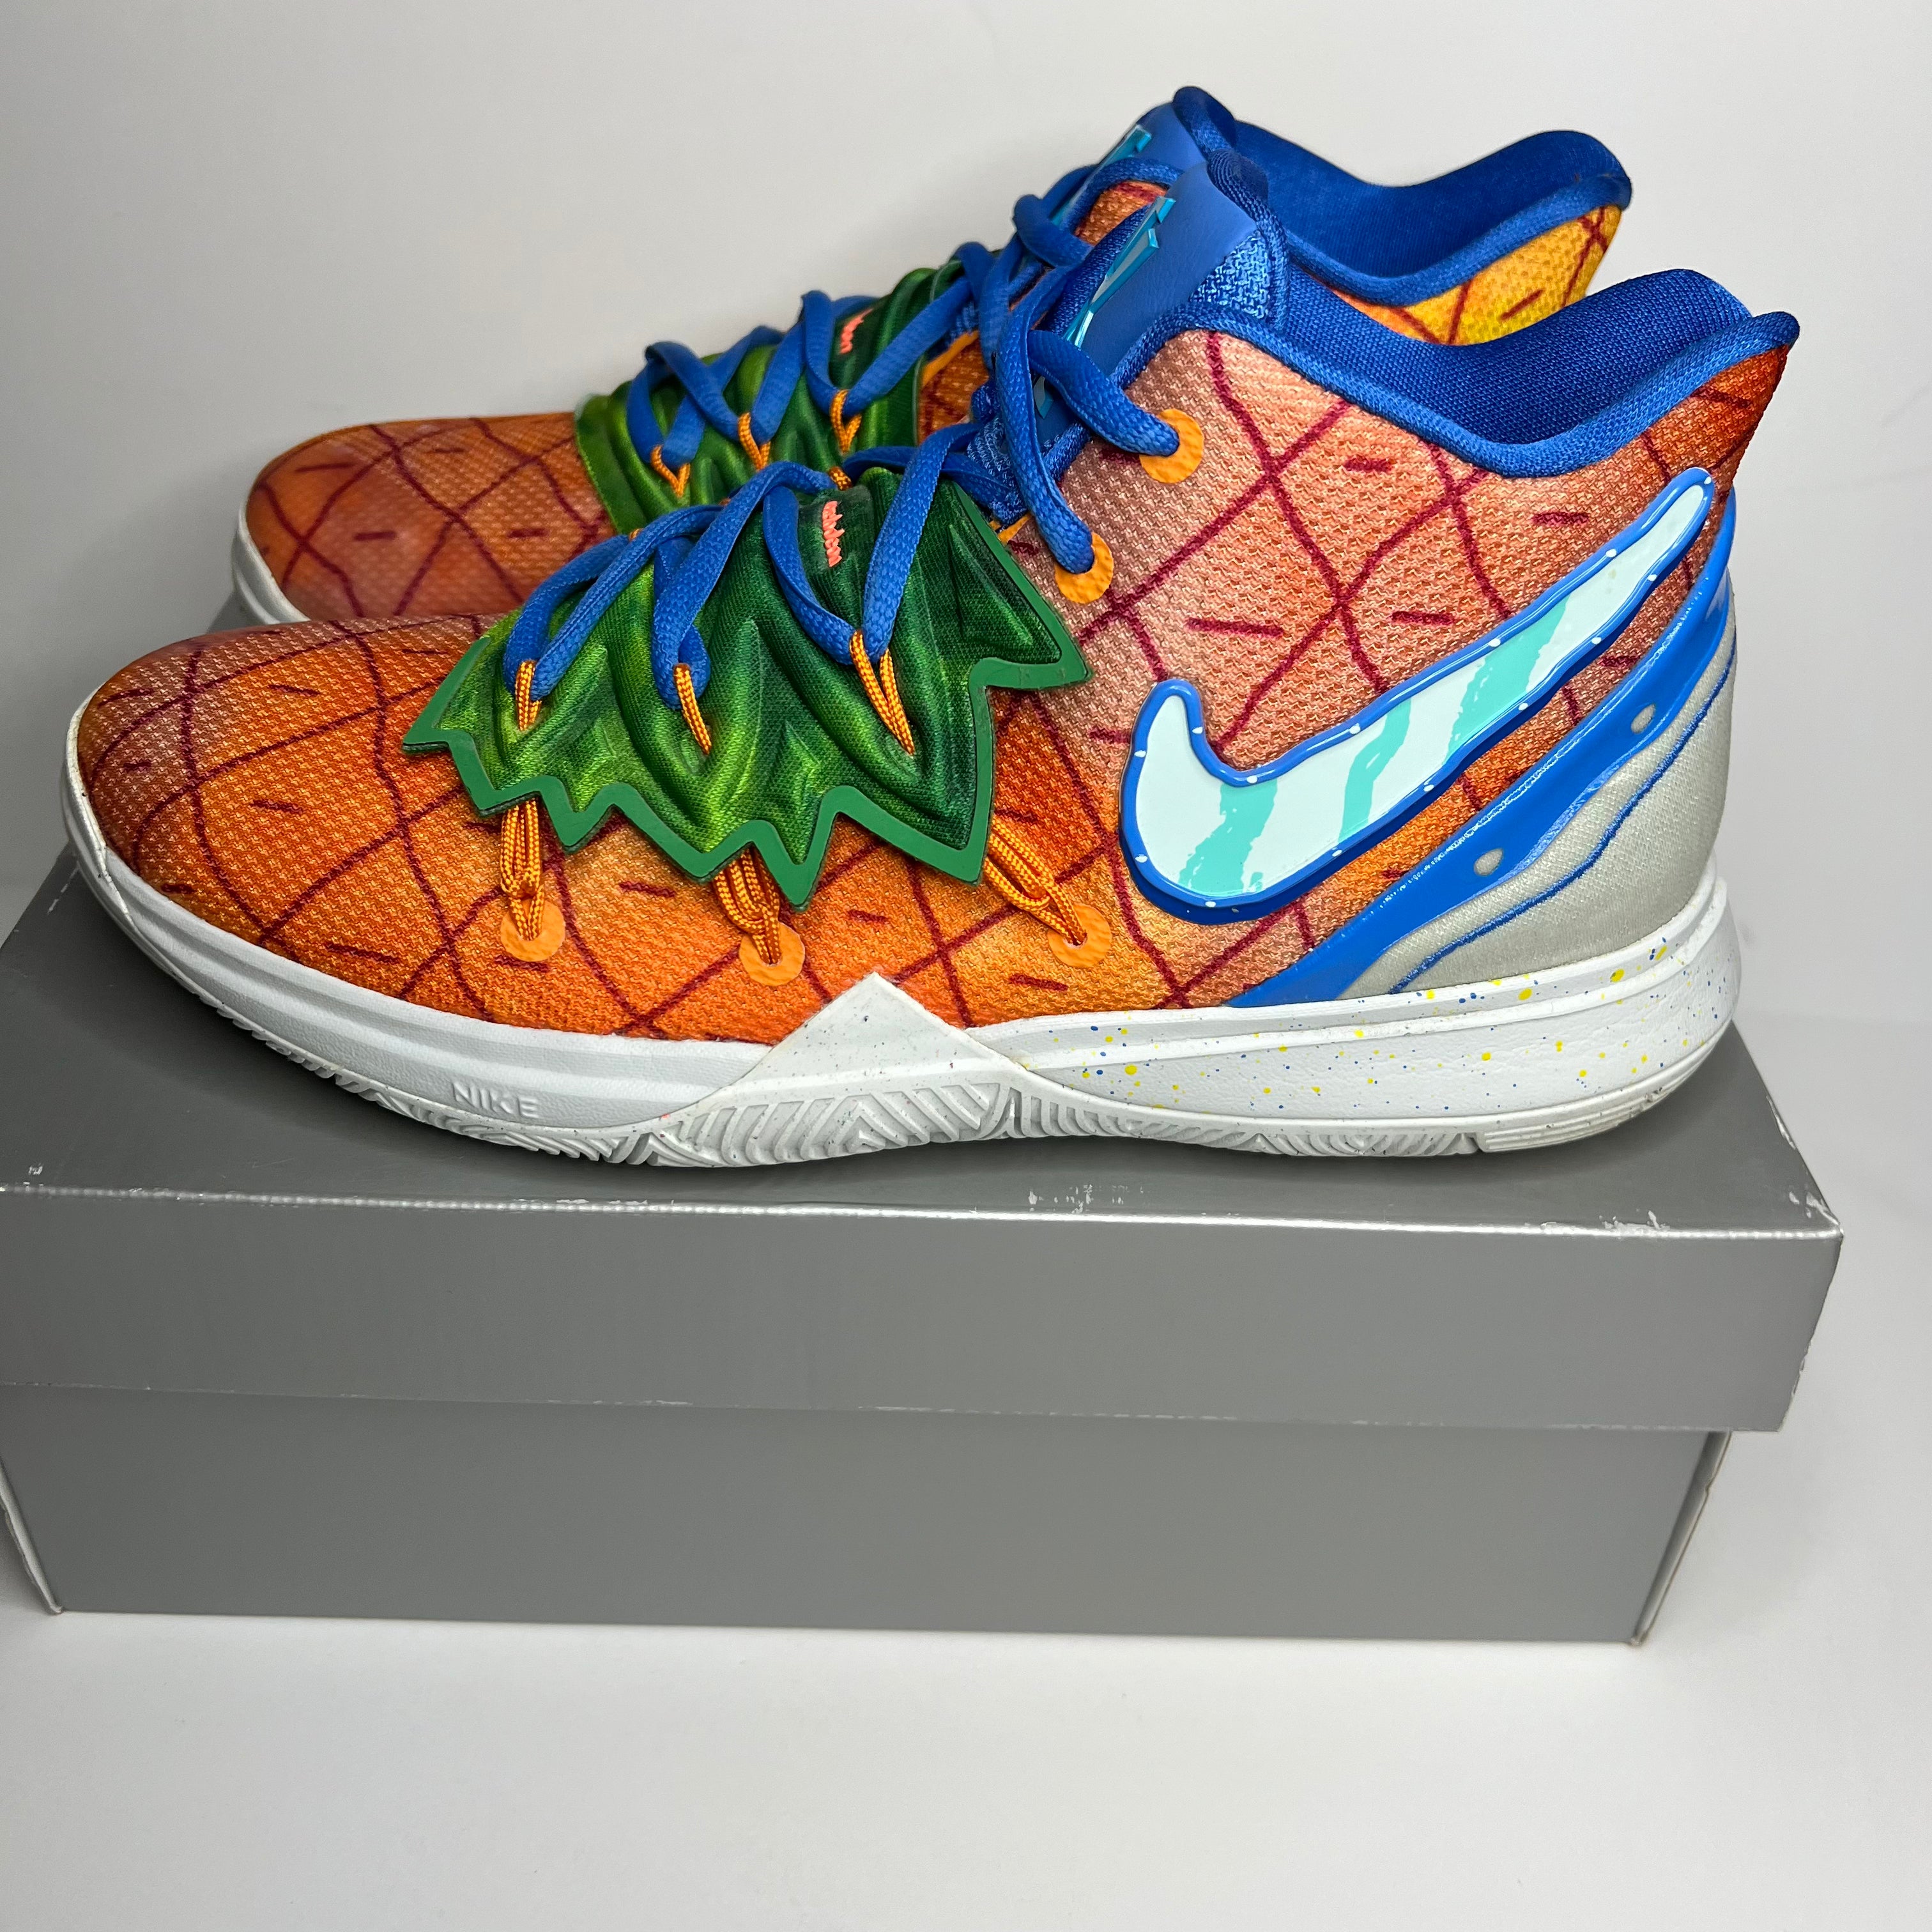 Nike Kyrie 5 “Pineapple House” (Size 7Y)